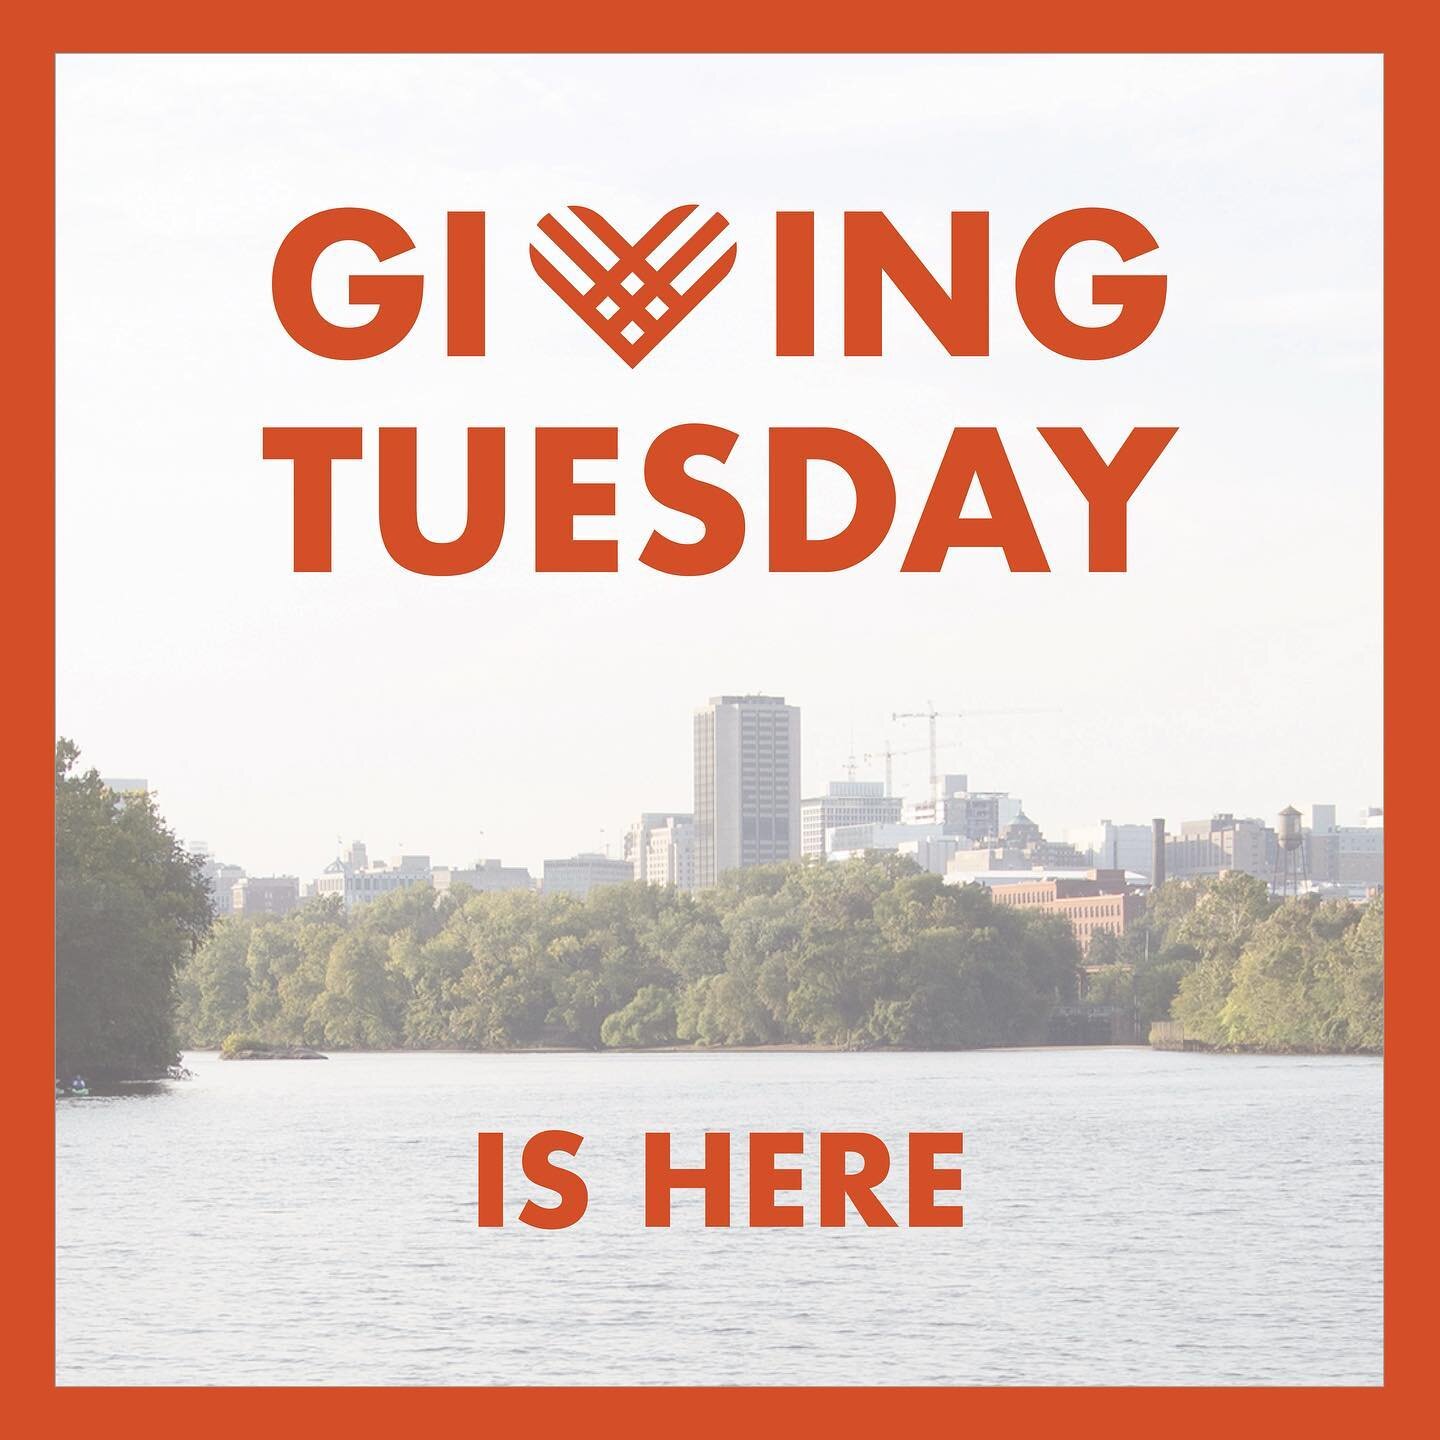 TODAY&rsquo;S THE DAY!
 
GivingTuesday has officially arrived 🥳 Thank you so much for following along for our countdown and showing your support along the way!
 
Today, Facebook is matching 100% of donations made towards our GivingTuesday fundraiser